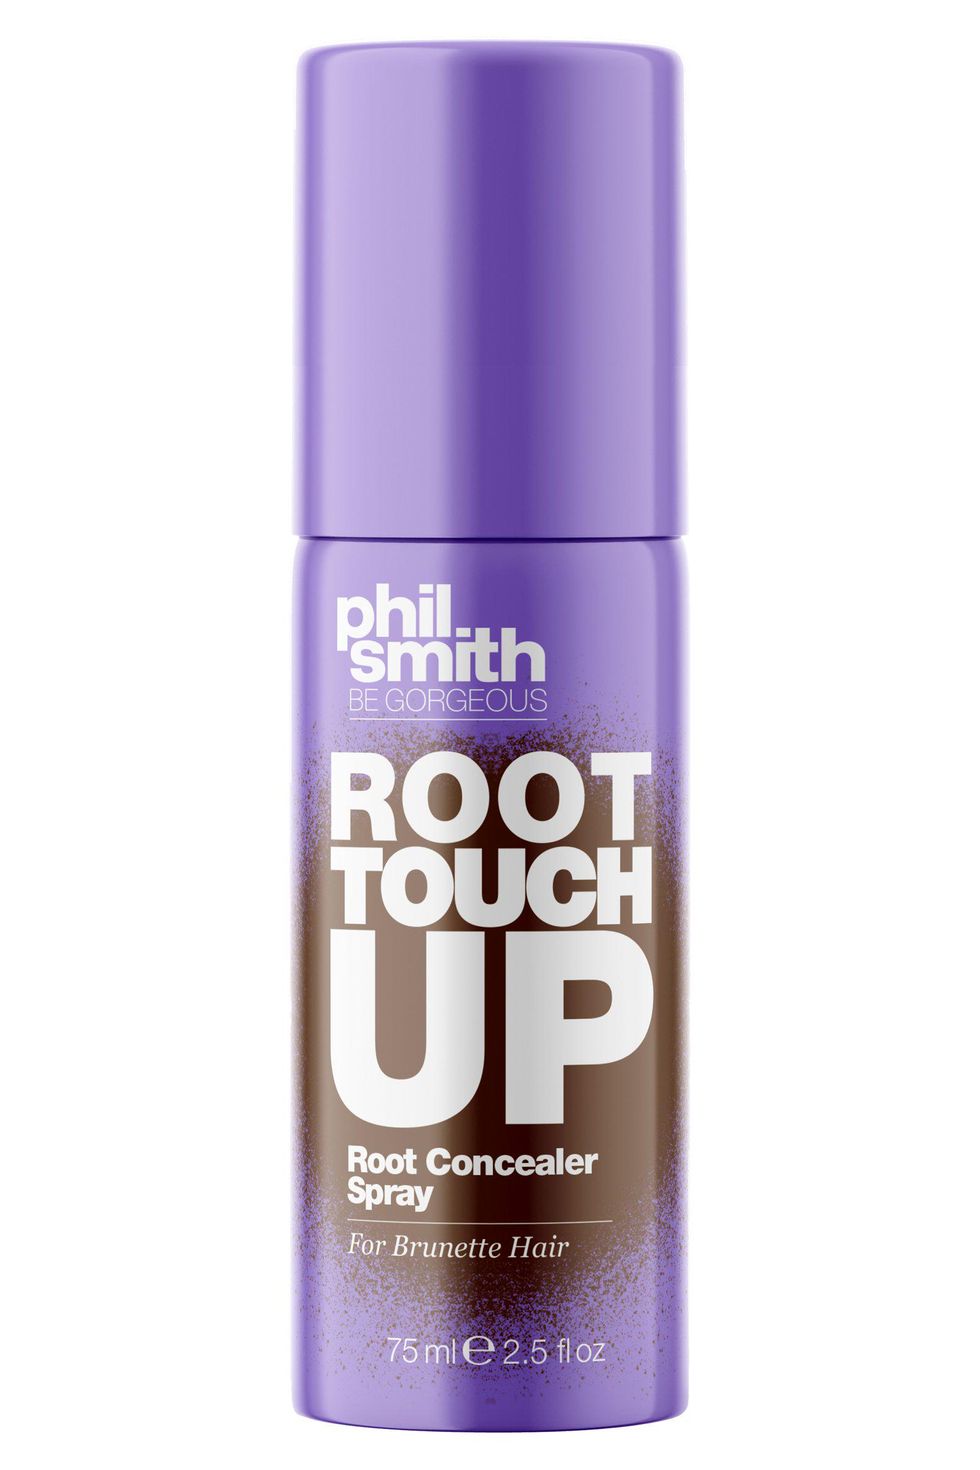 Be Gorgeous Root Touch Up Root Concealer Spray